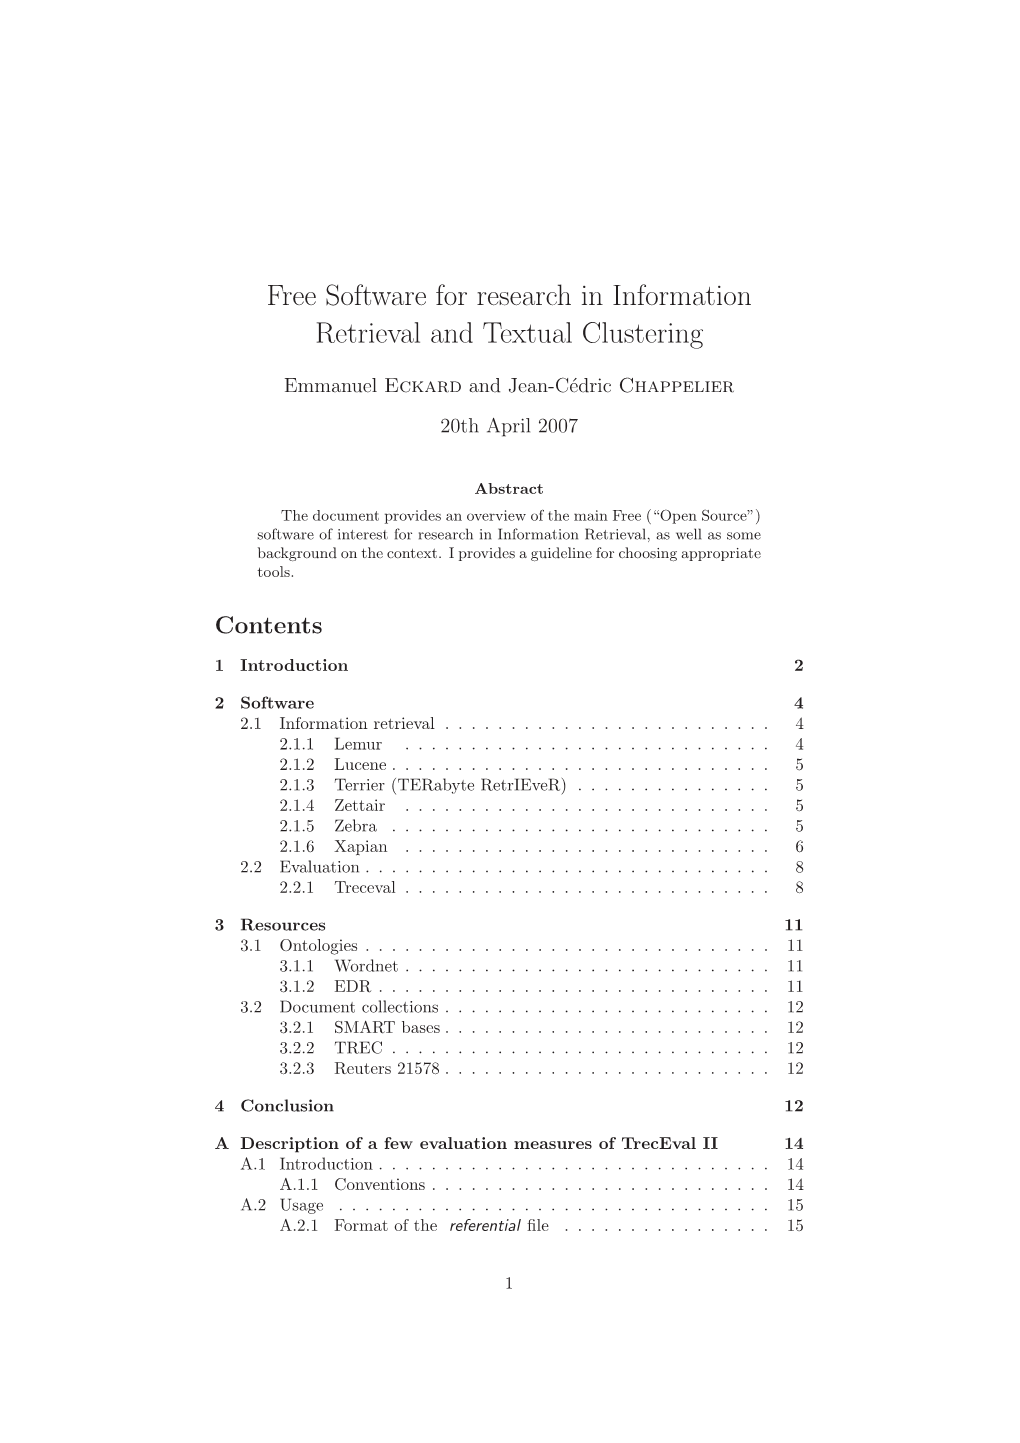 Free Software for Research in Information Retrieval and Textual Clustering